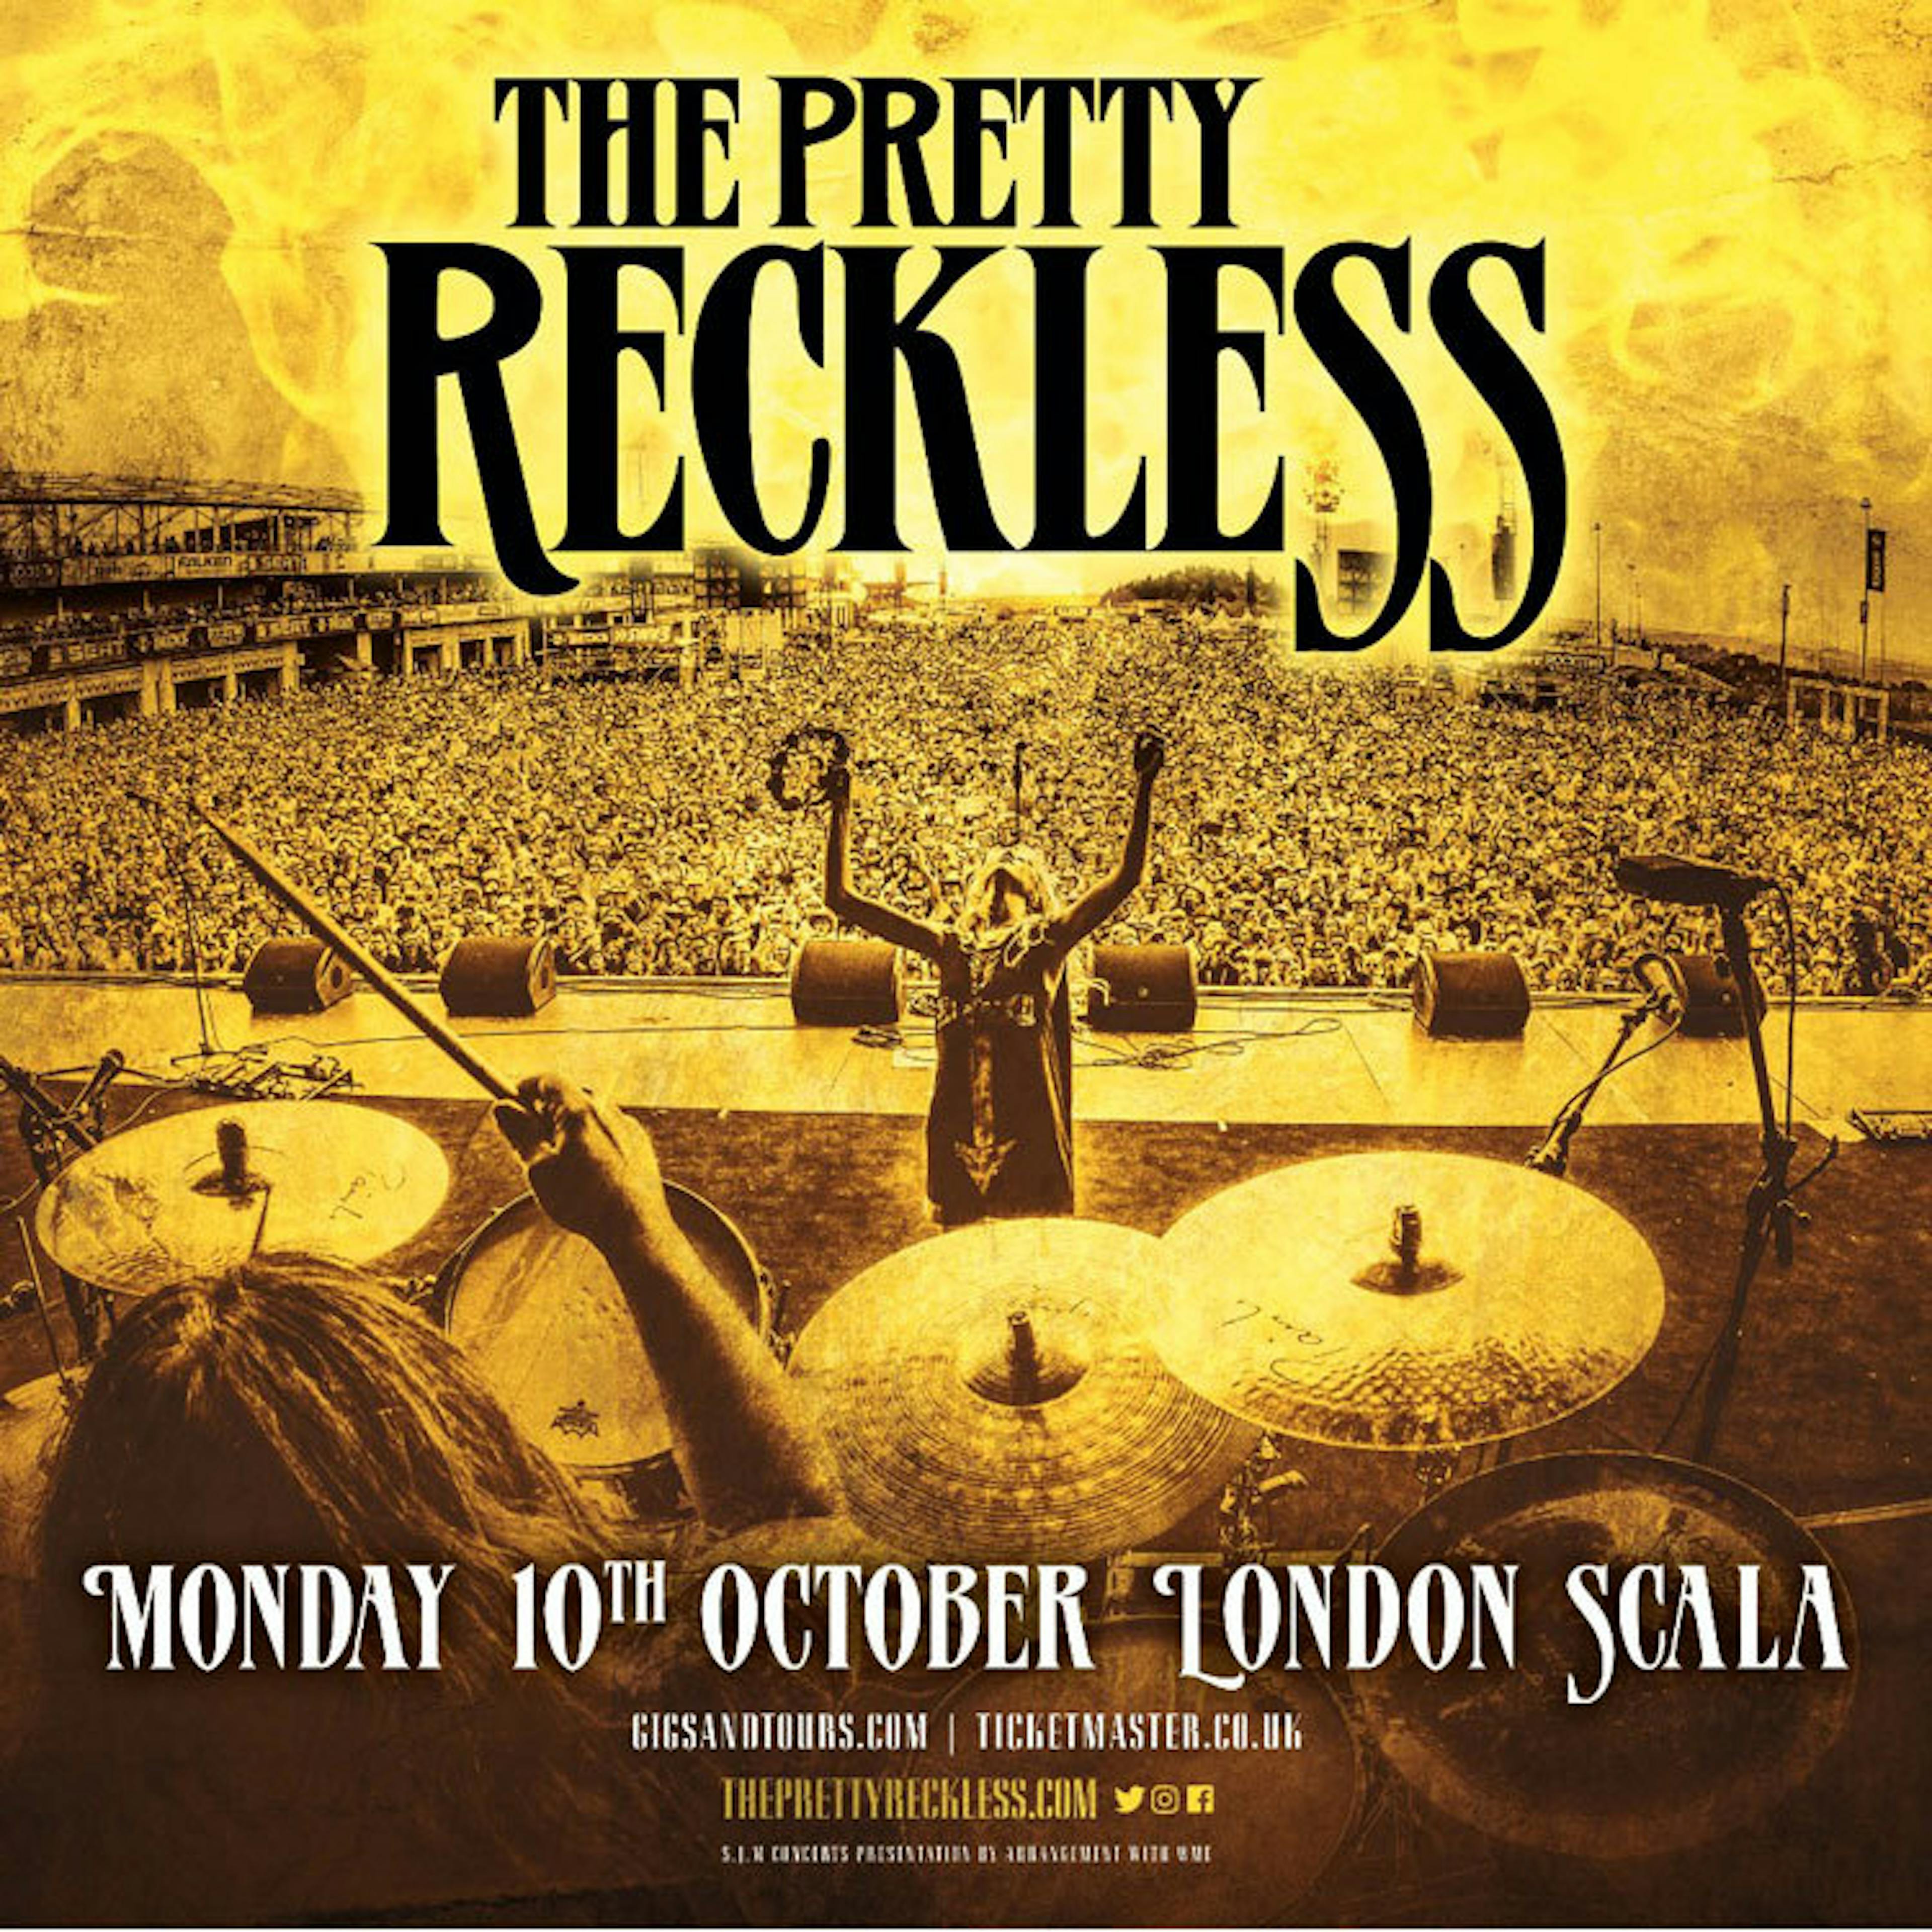 The Pretty Reckless Announce London Show